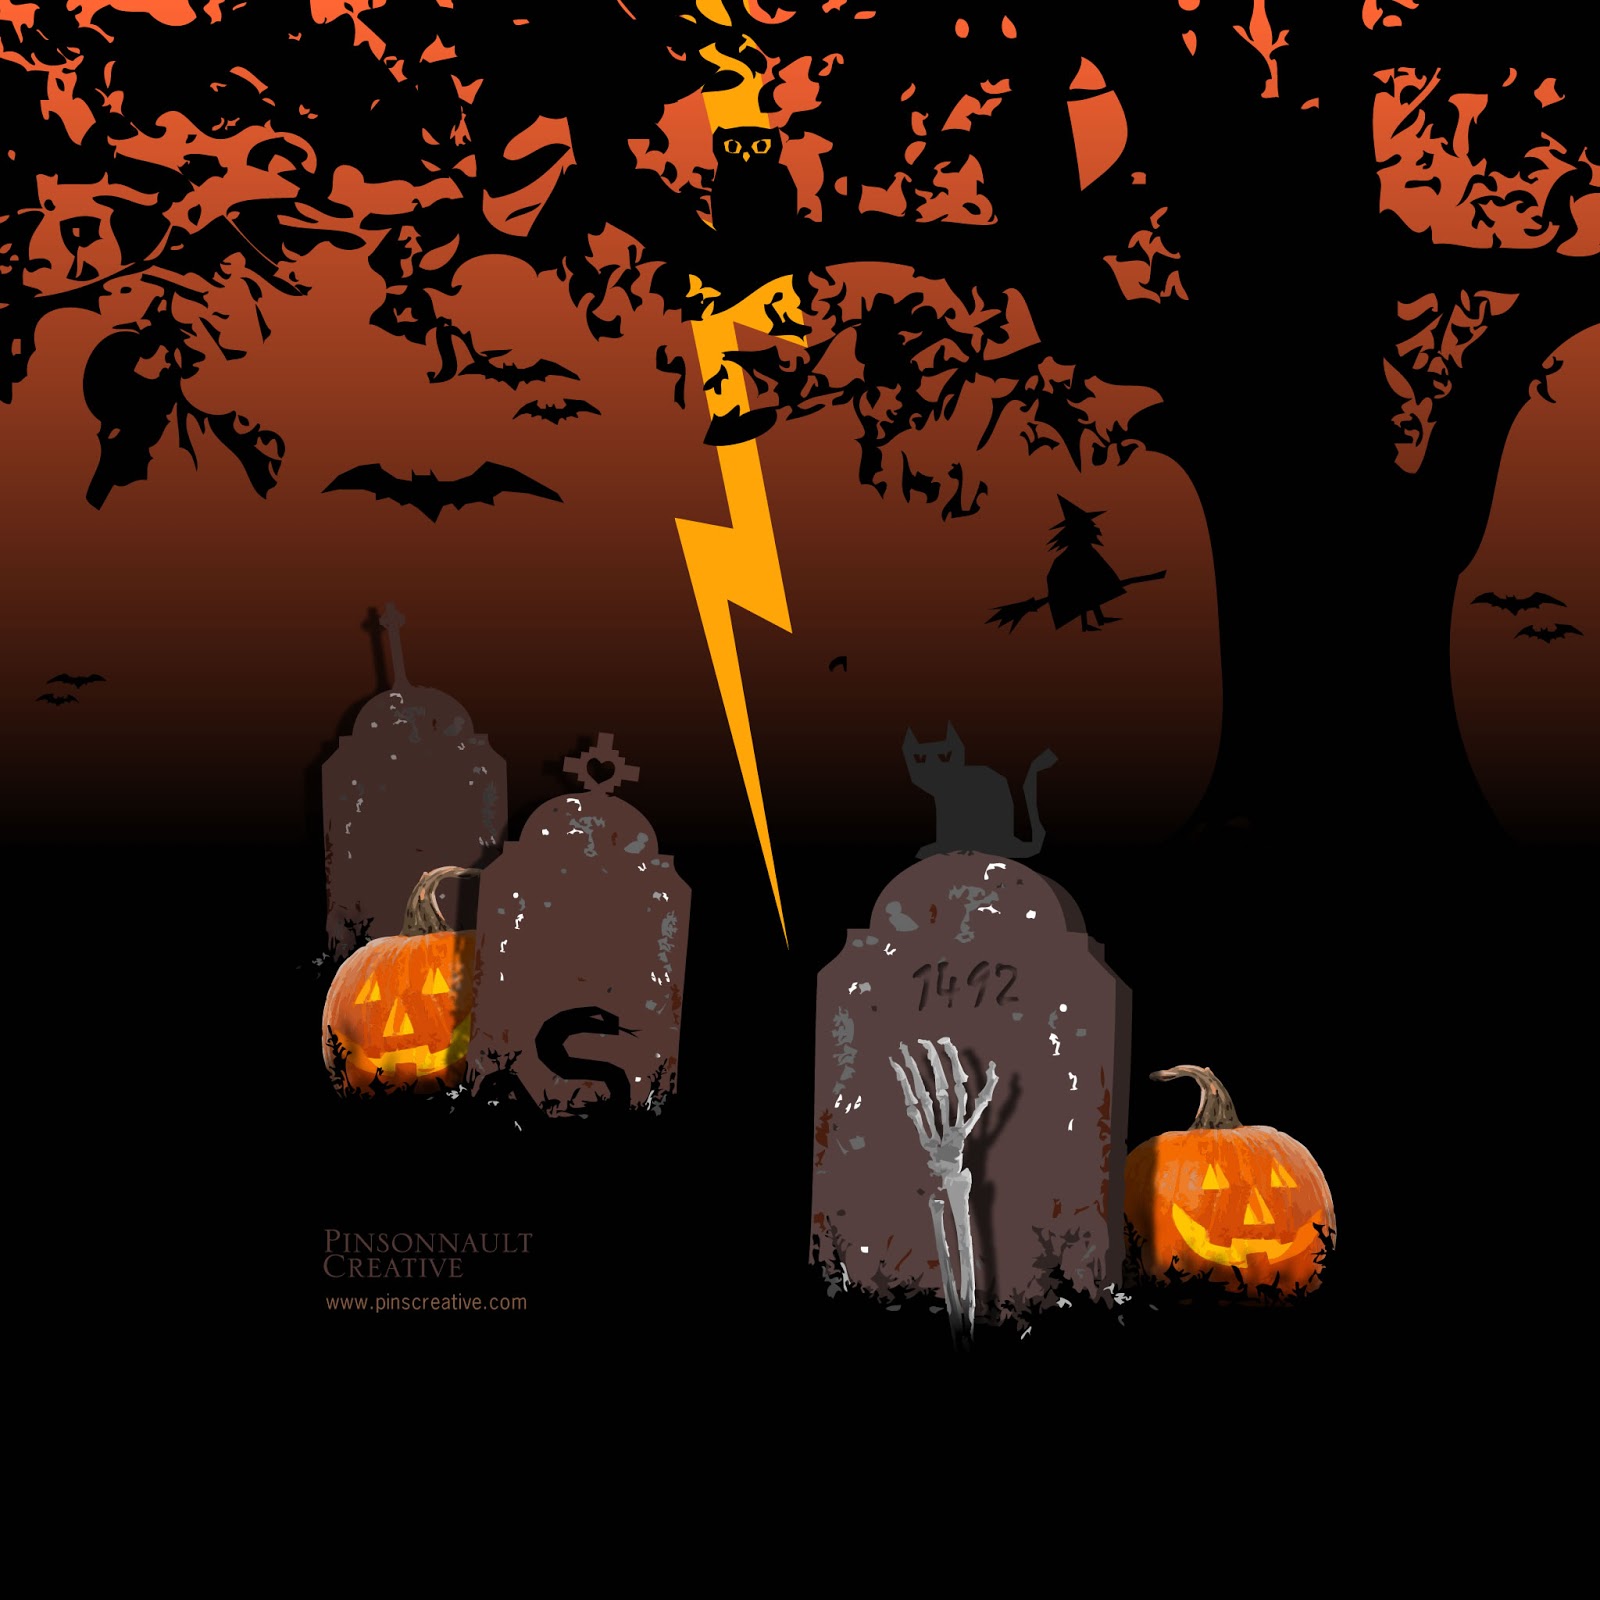 Halloween Themed HD Wallpapers for The New iPad - Gadgets, Apps and